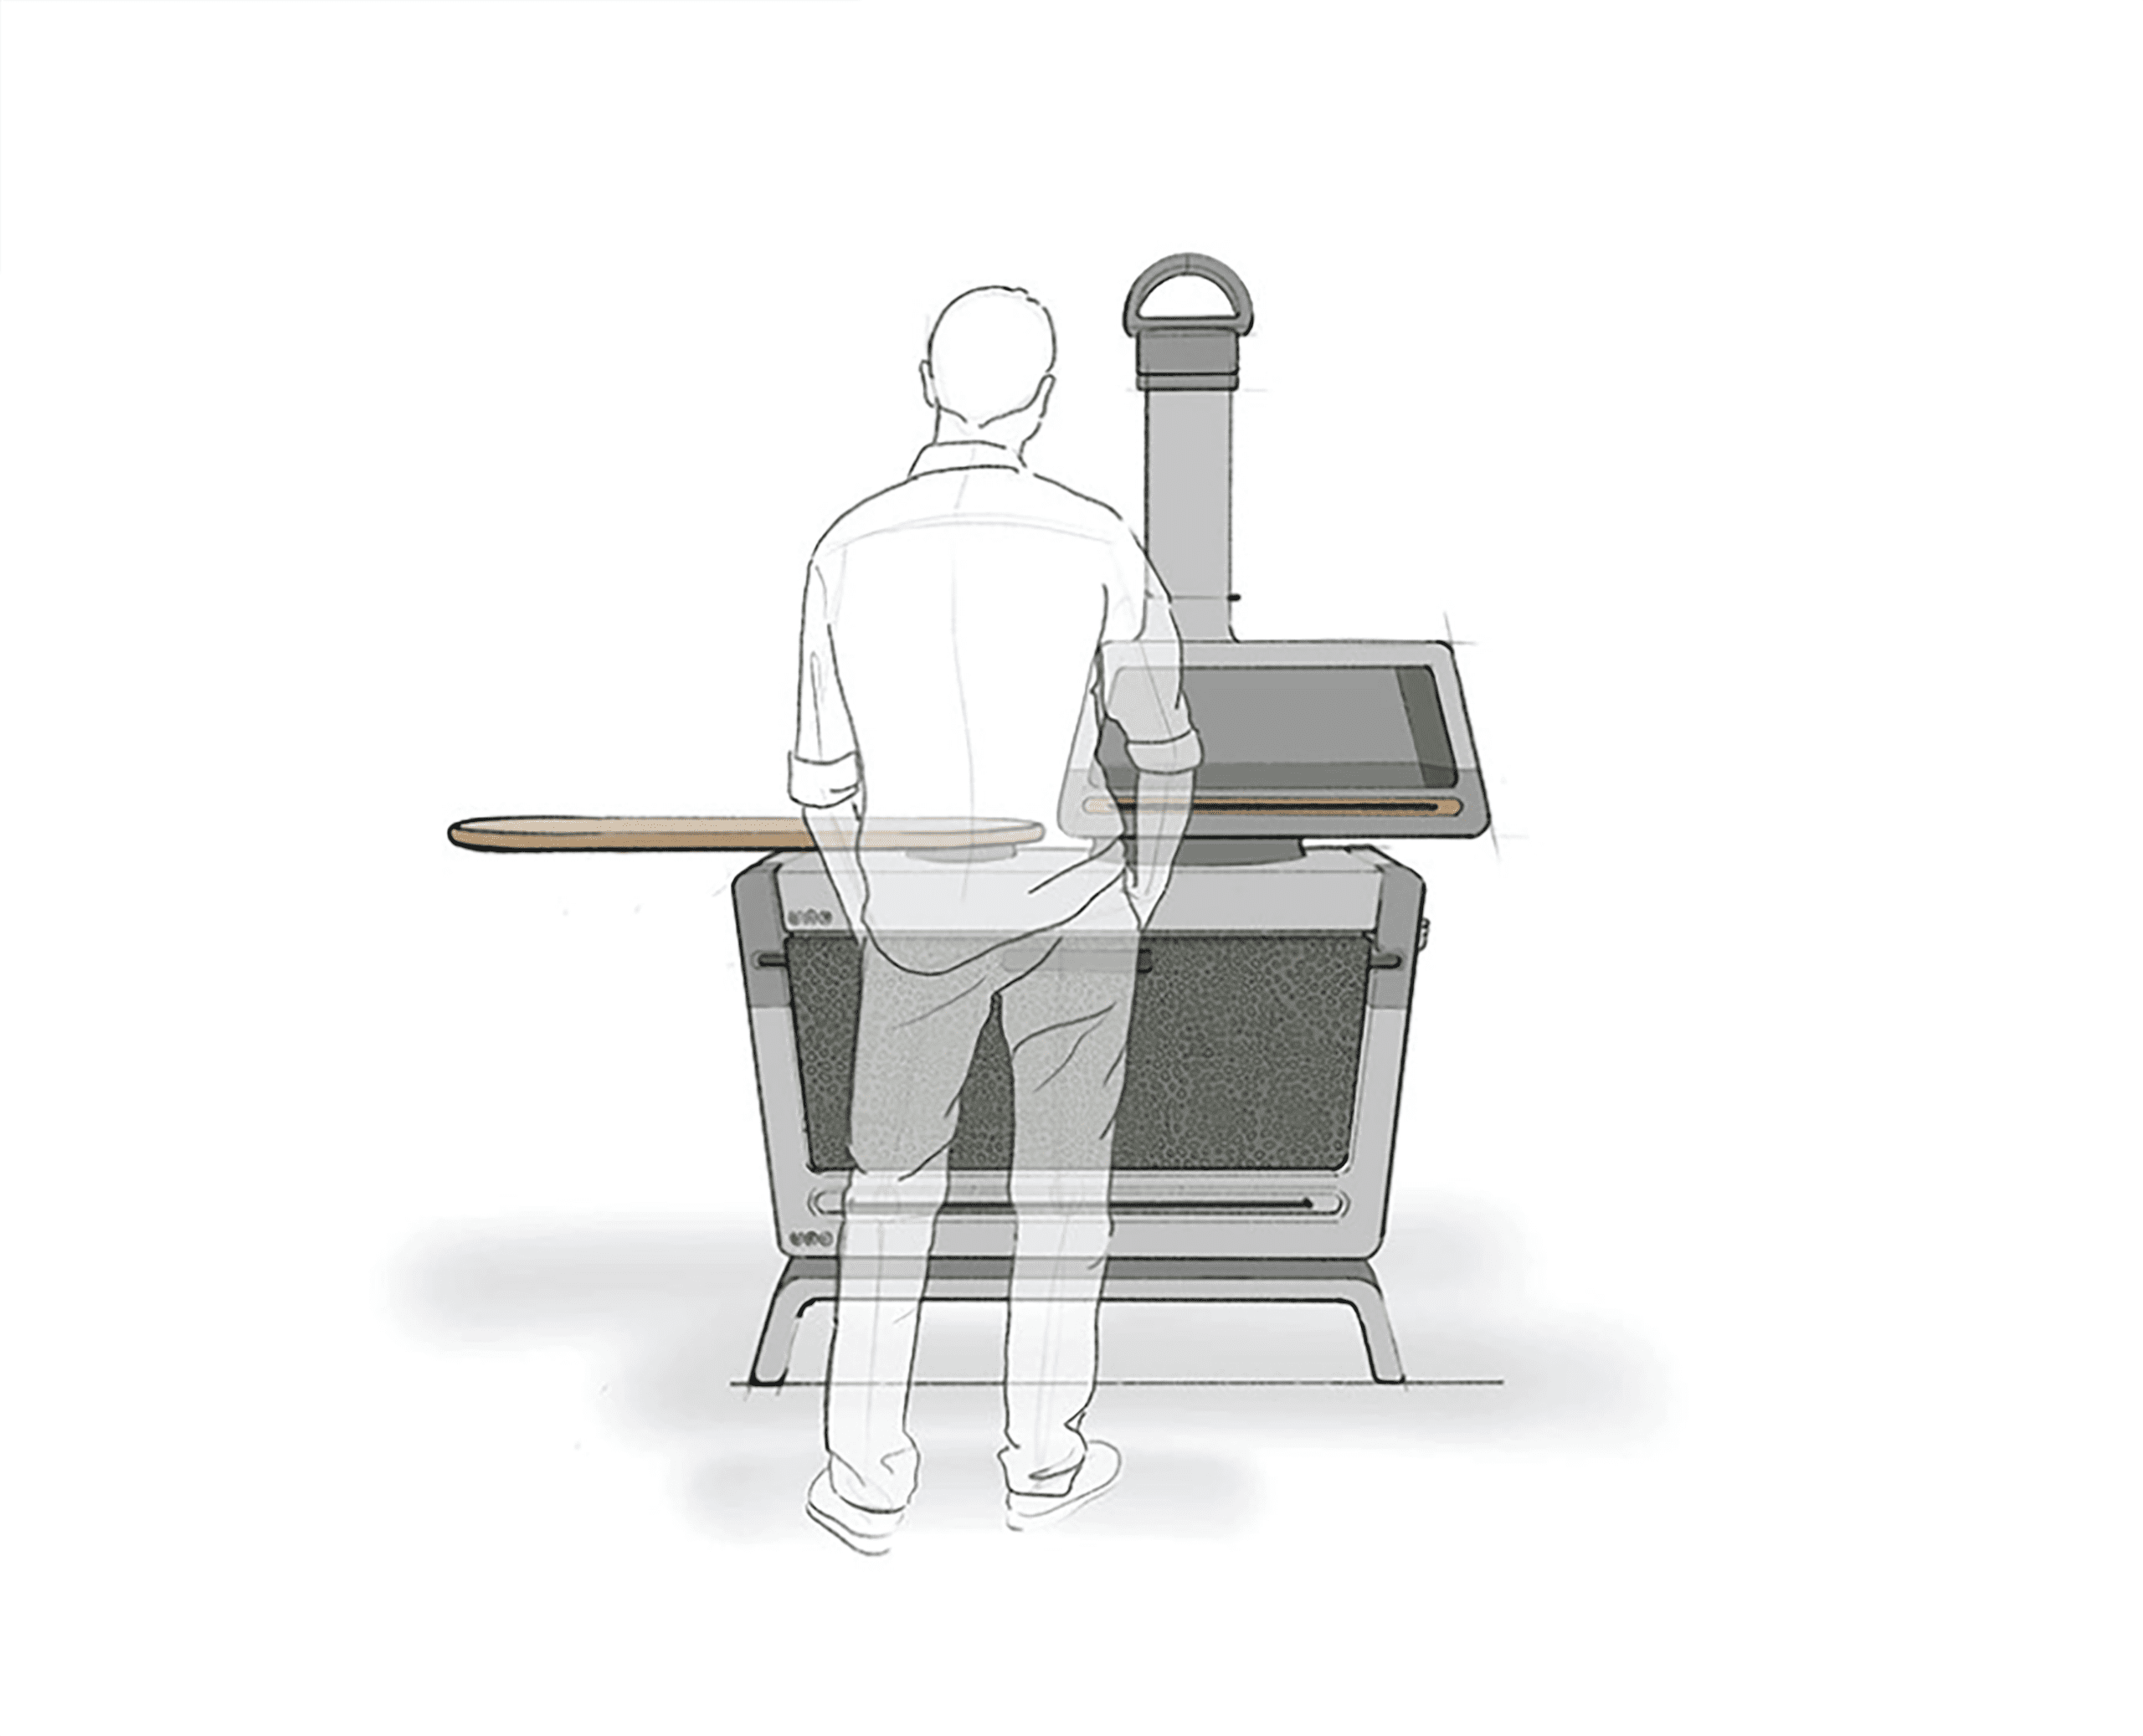 Digital mockup of a man standing in front of a minimalistic grill. The man is a transparent outline, while the grill is made of grey metal with a wooden countertop. The grill is made of three pieces- a large rectangular tank on the bottom, a smaller rectangular oven on the top, and a thin and tall chimney in the center.